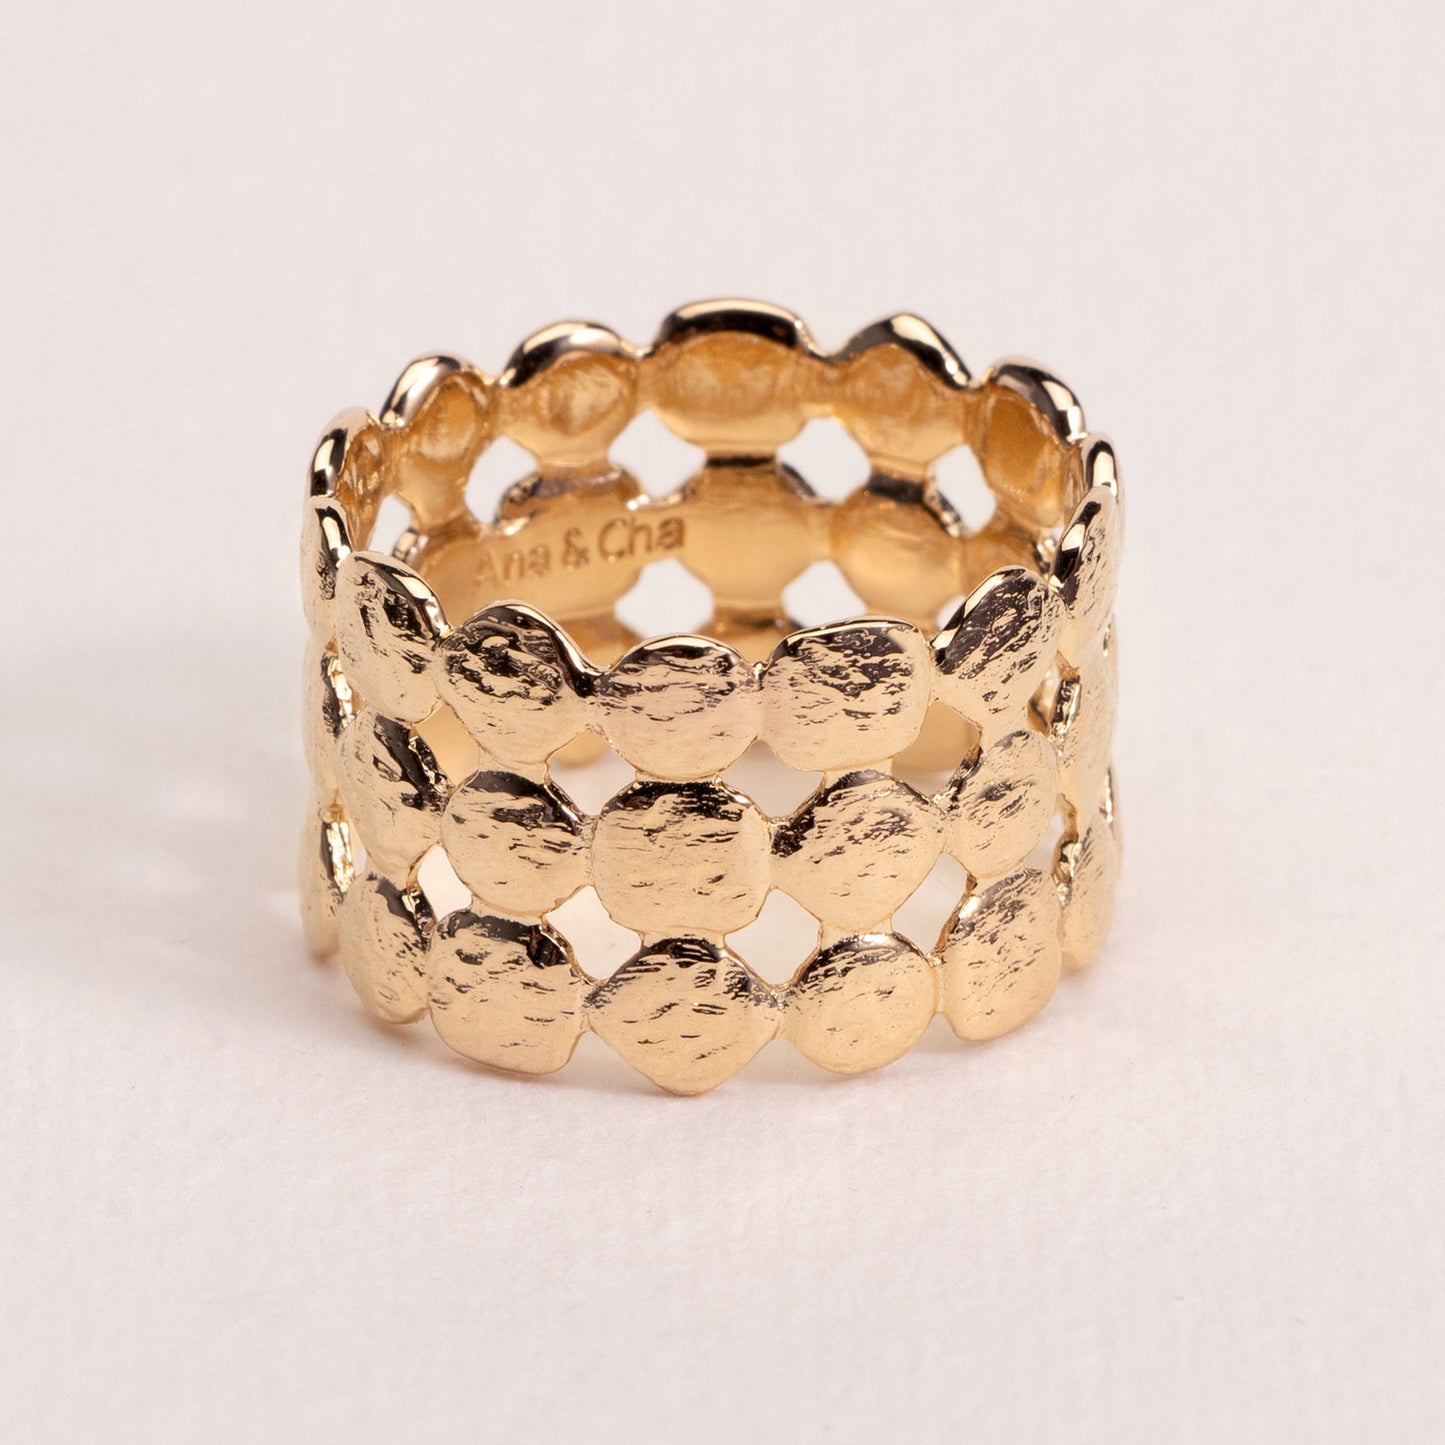 Julia - Gold Plated Ring - Ana et Cha